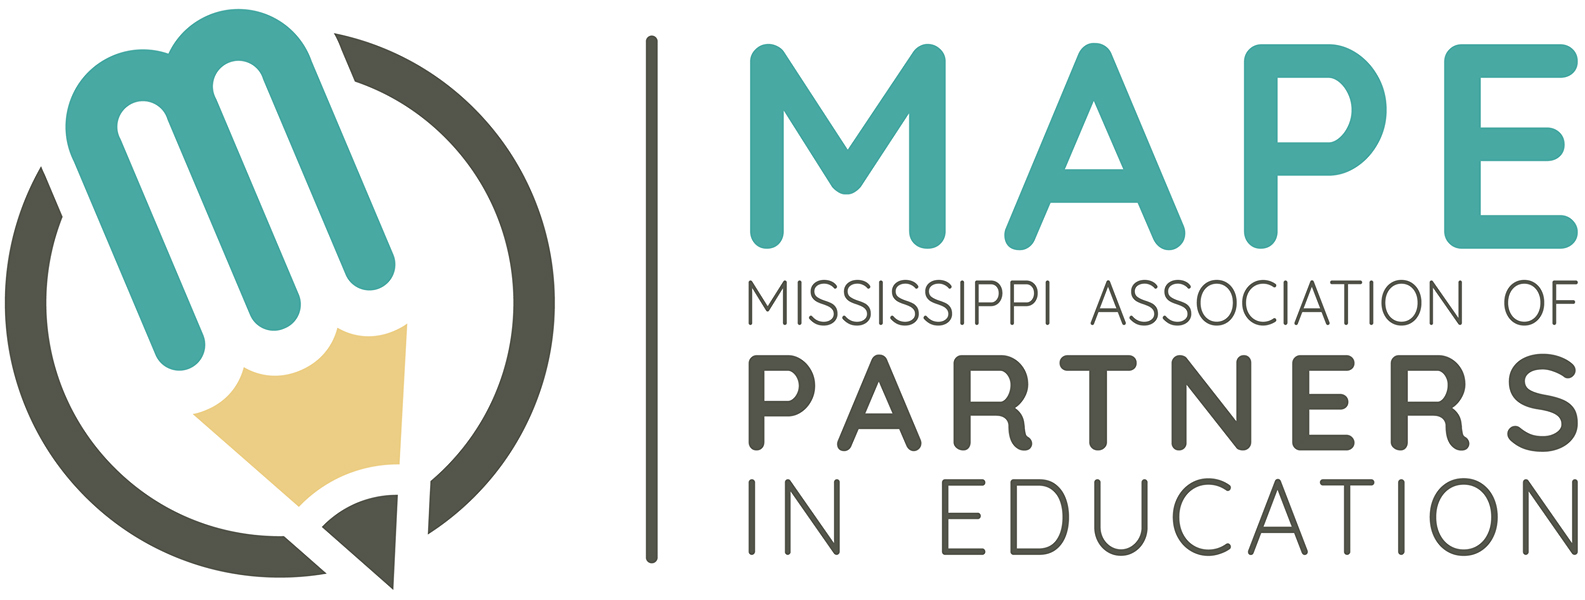 MS Association of Partners in Education logo